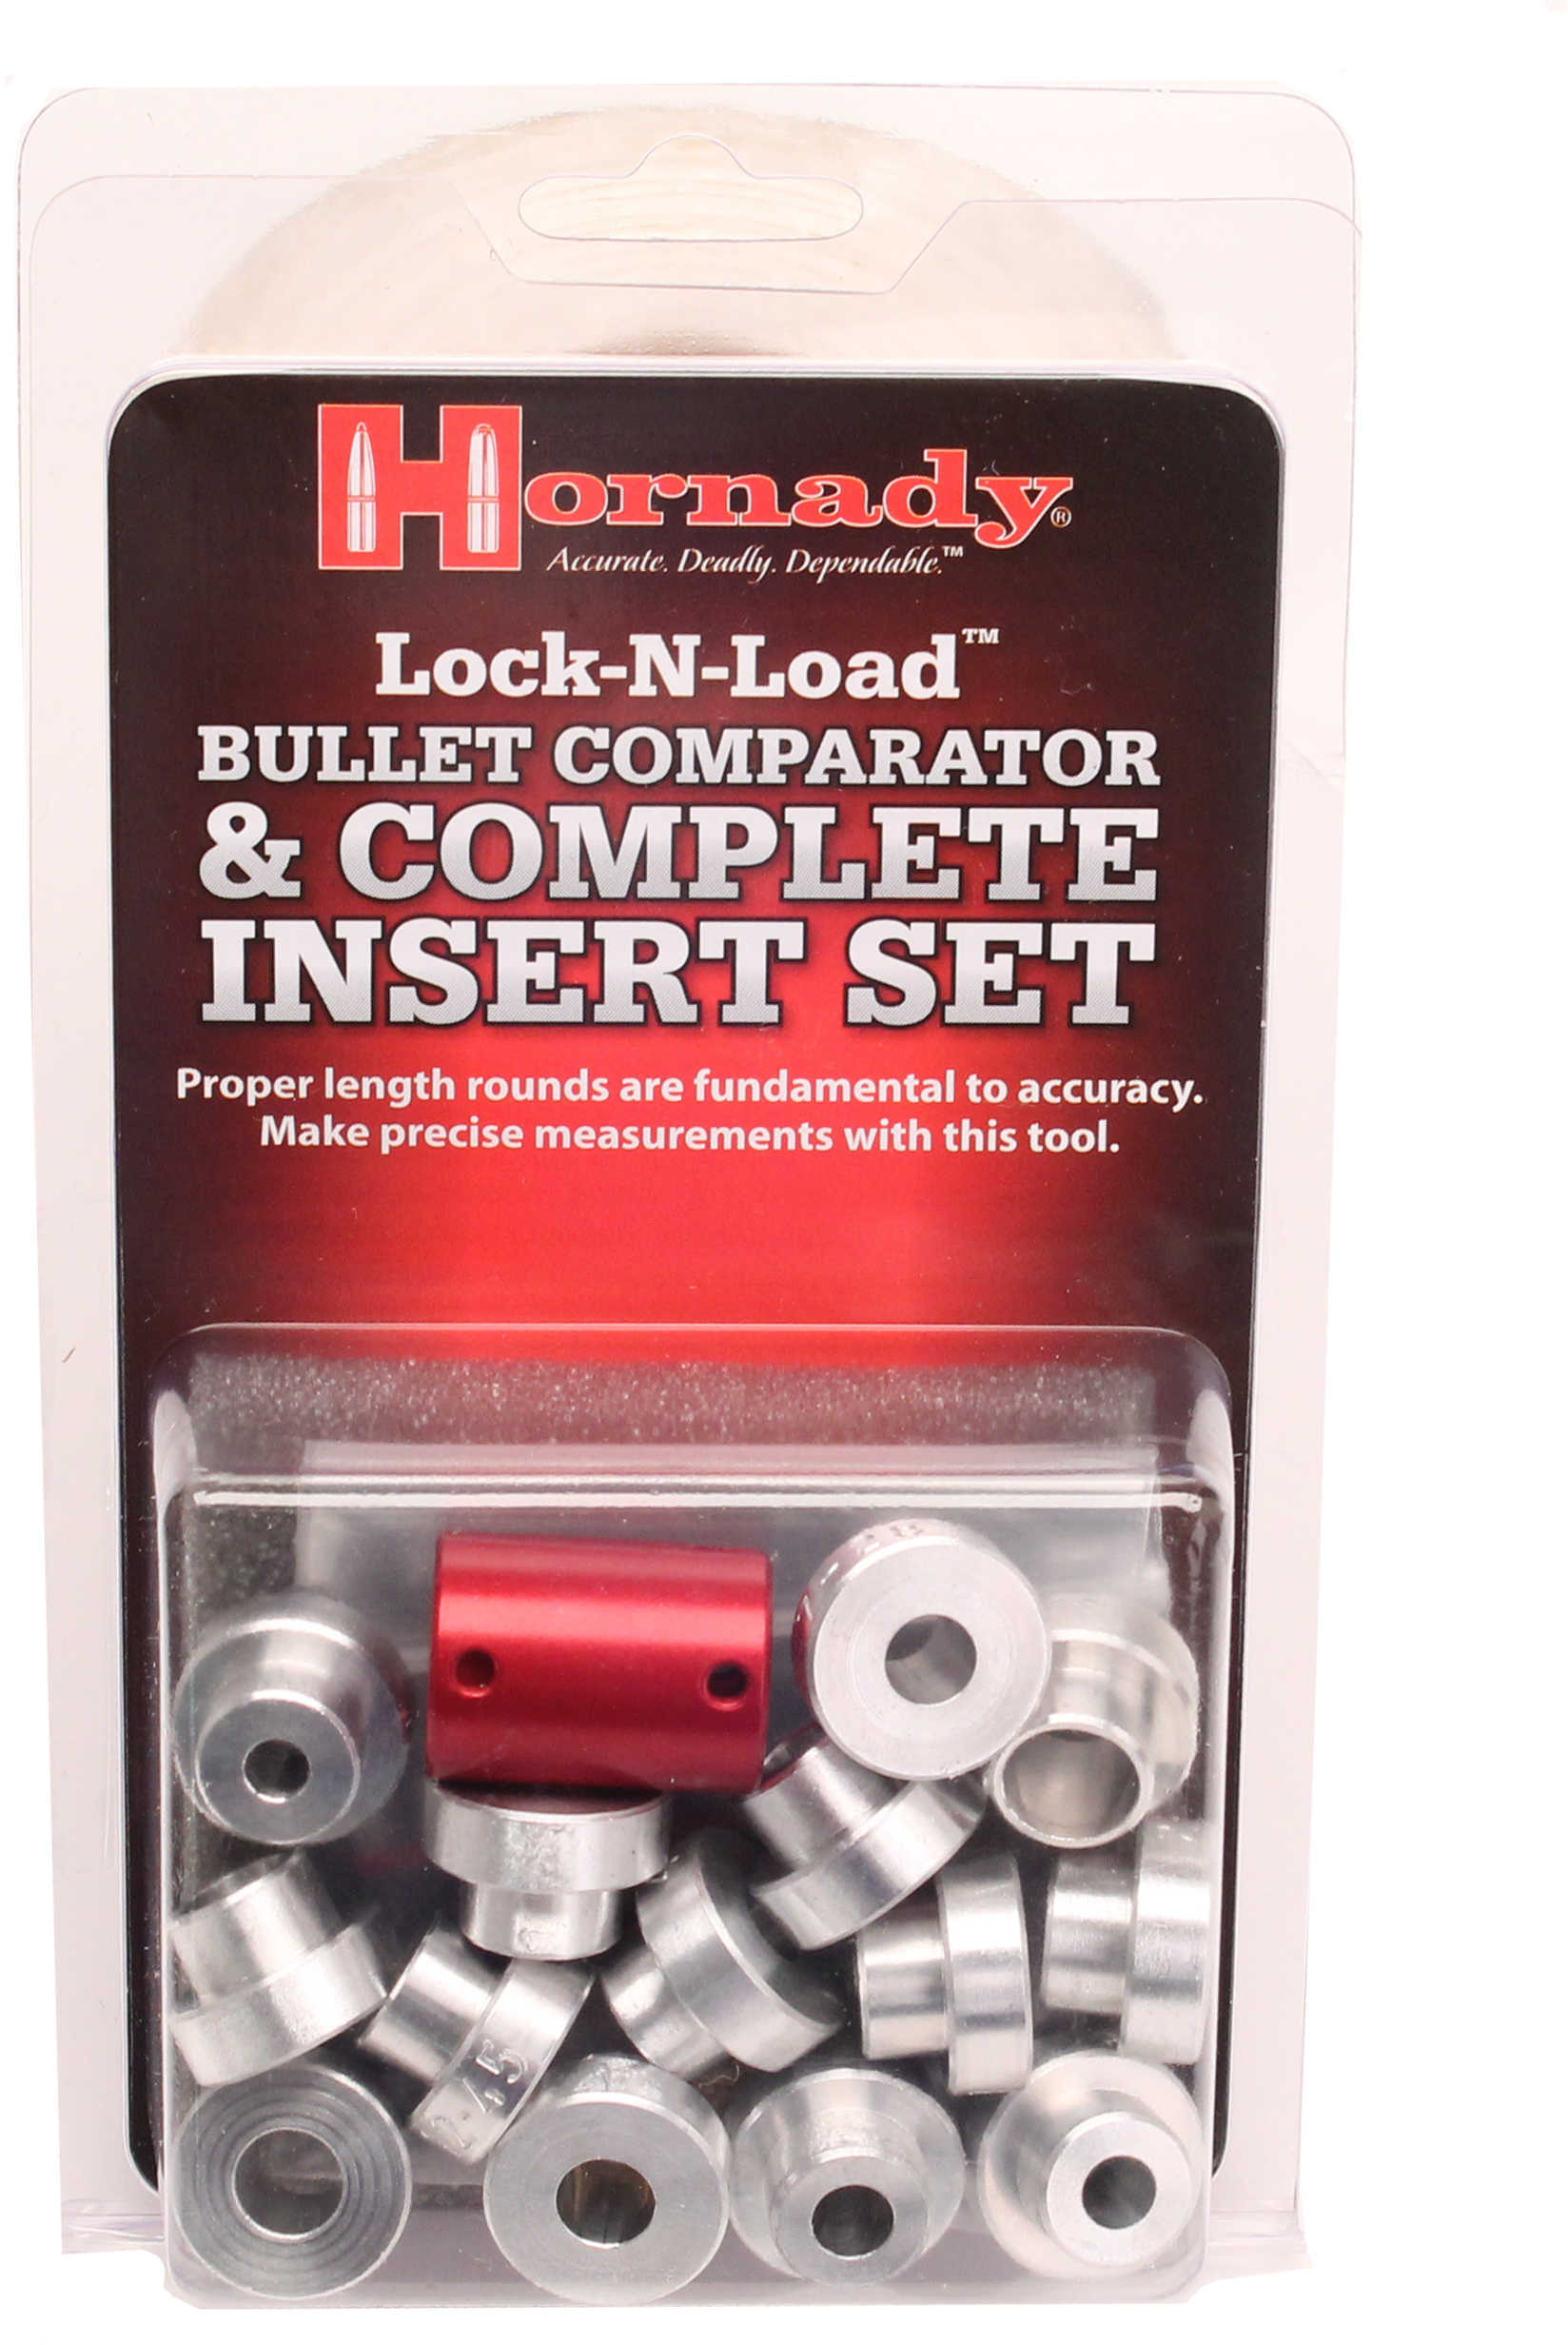 Hornady Lock-N-Load Bullet Comparator Set (Body With 14 Inserts)